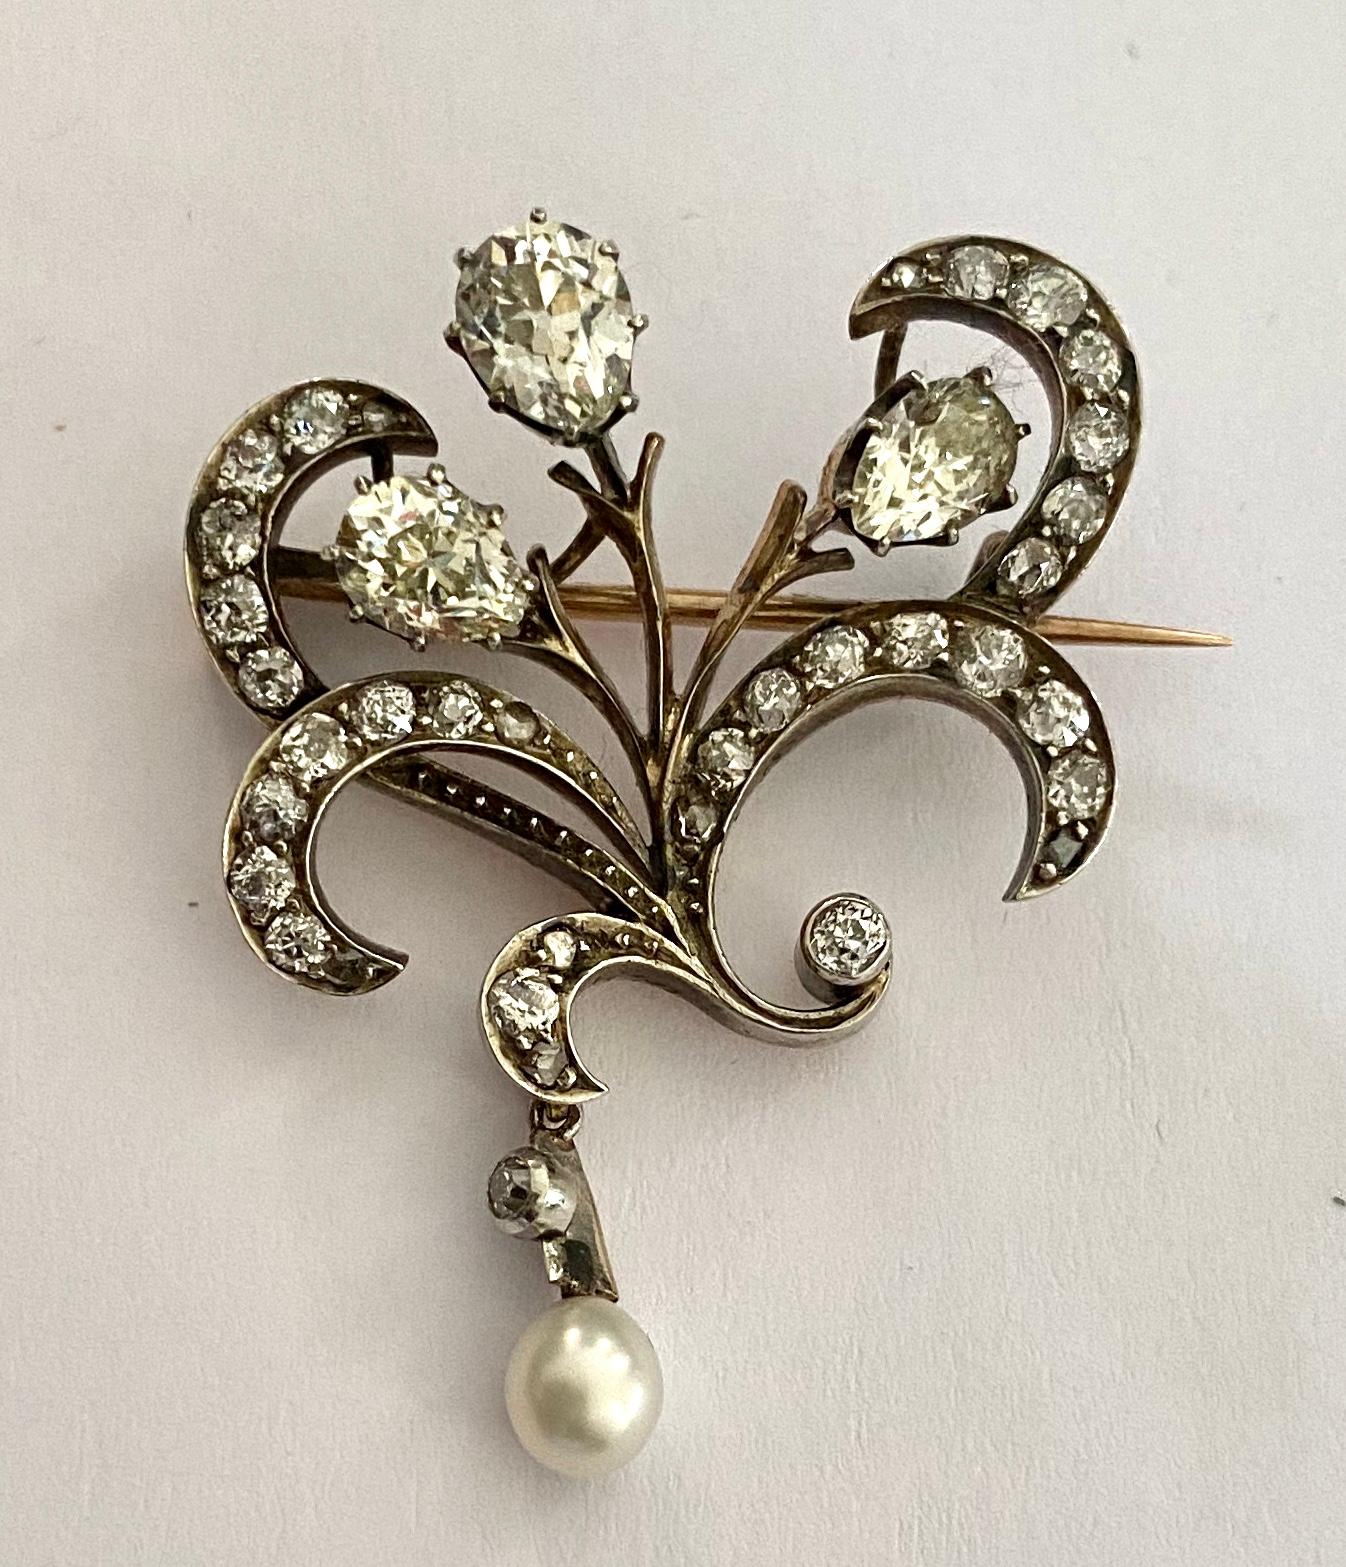 One  (1) 14K. Yellow Gold and Silver  Diamond Brooch 
Signed: VDS+ = Workmaster: S.van der Sluis Utrecht ca 1925
set with:
3 pear shape natural diamonds
35 old Europena and rose cut diamonds
Total weight of diamonds: 3.00 ct.  VSI/Wesselton-Cristal